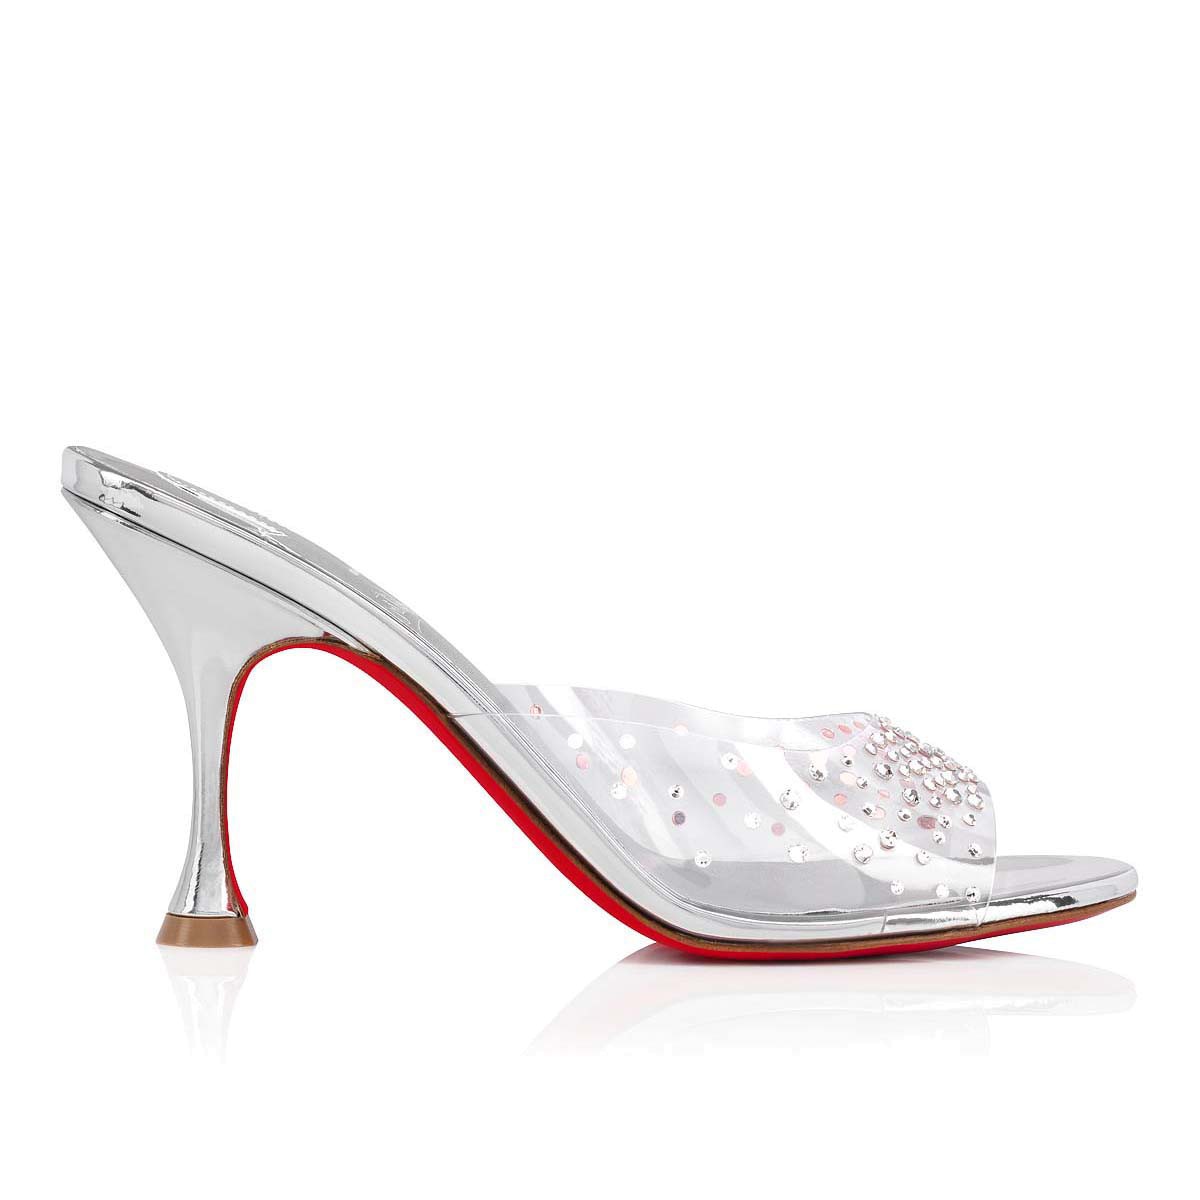 Shoes - Degramule Strass - Christian Louboutin